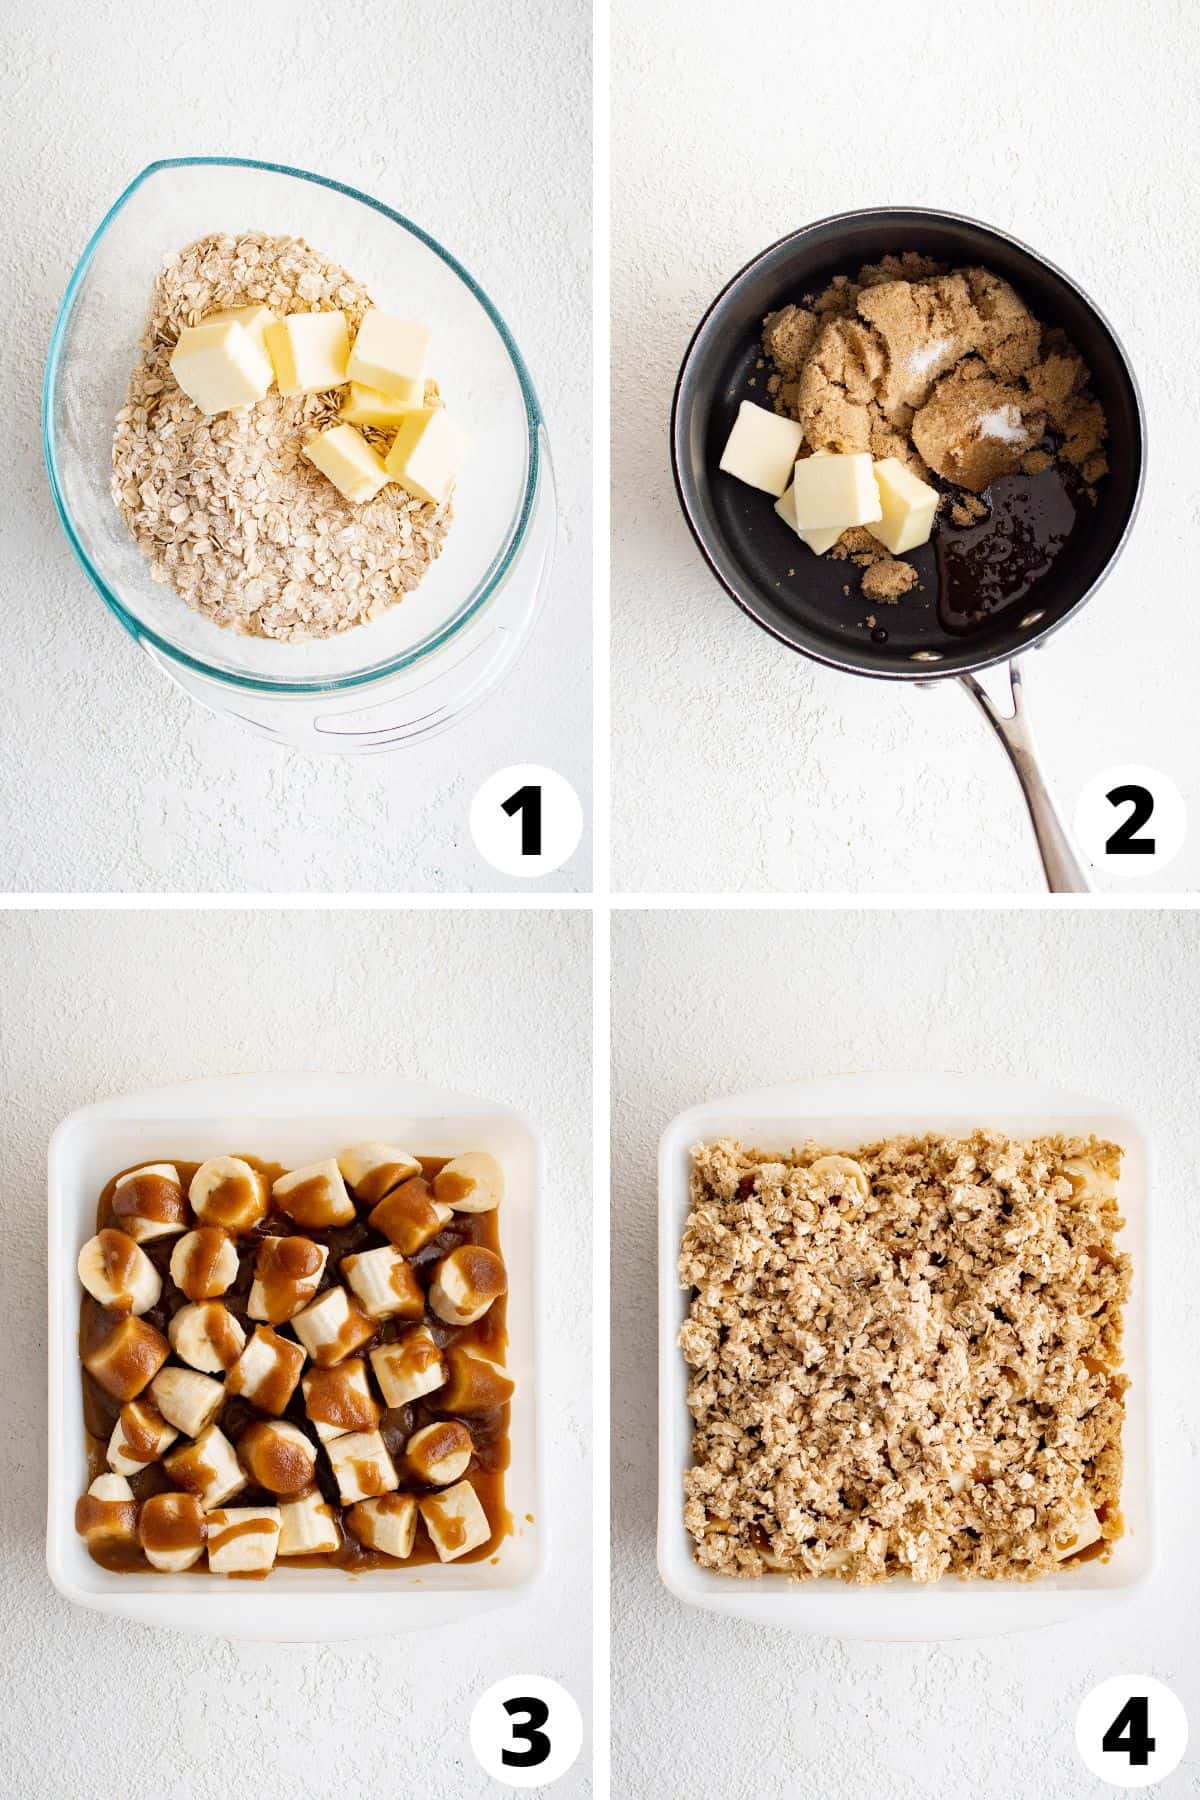 Collage of Banana Crumble Recipe Steps